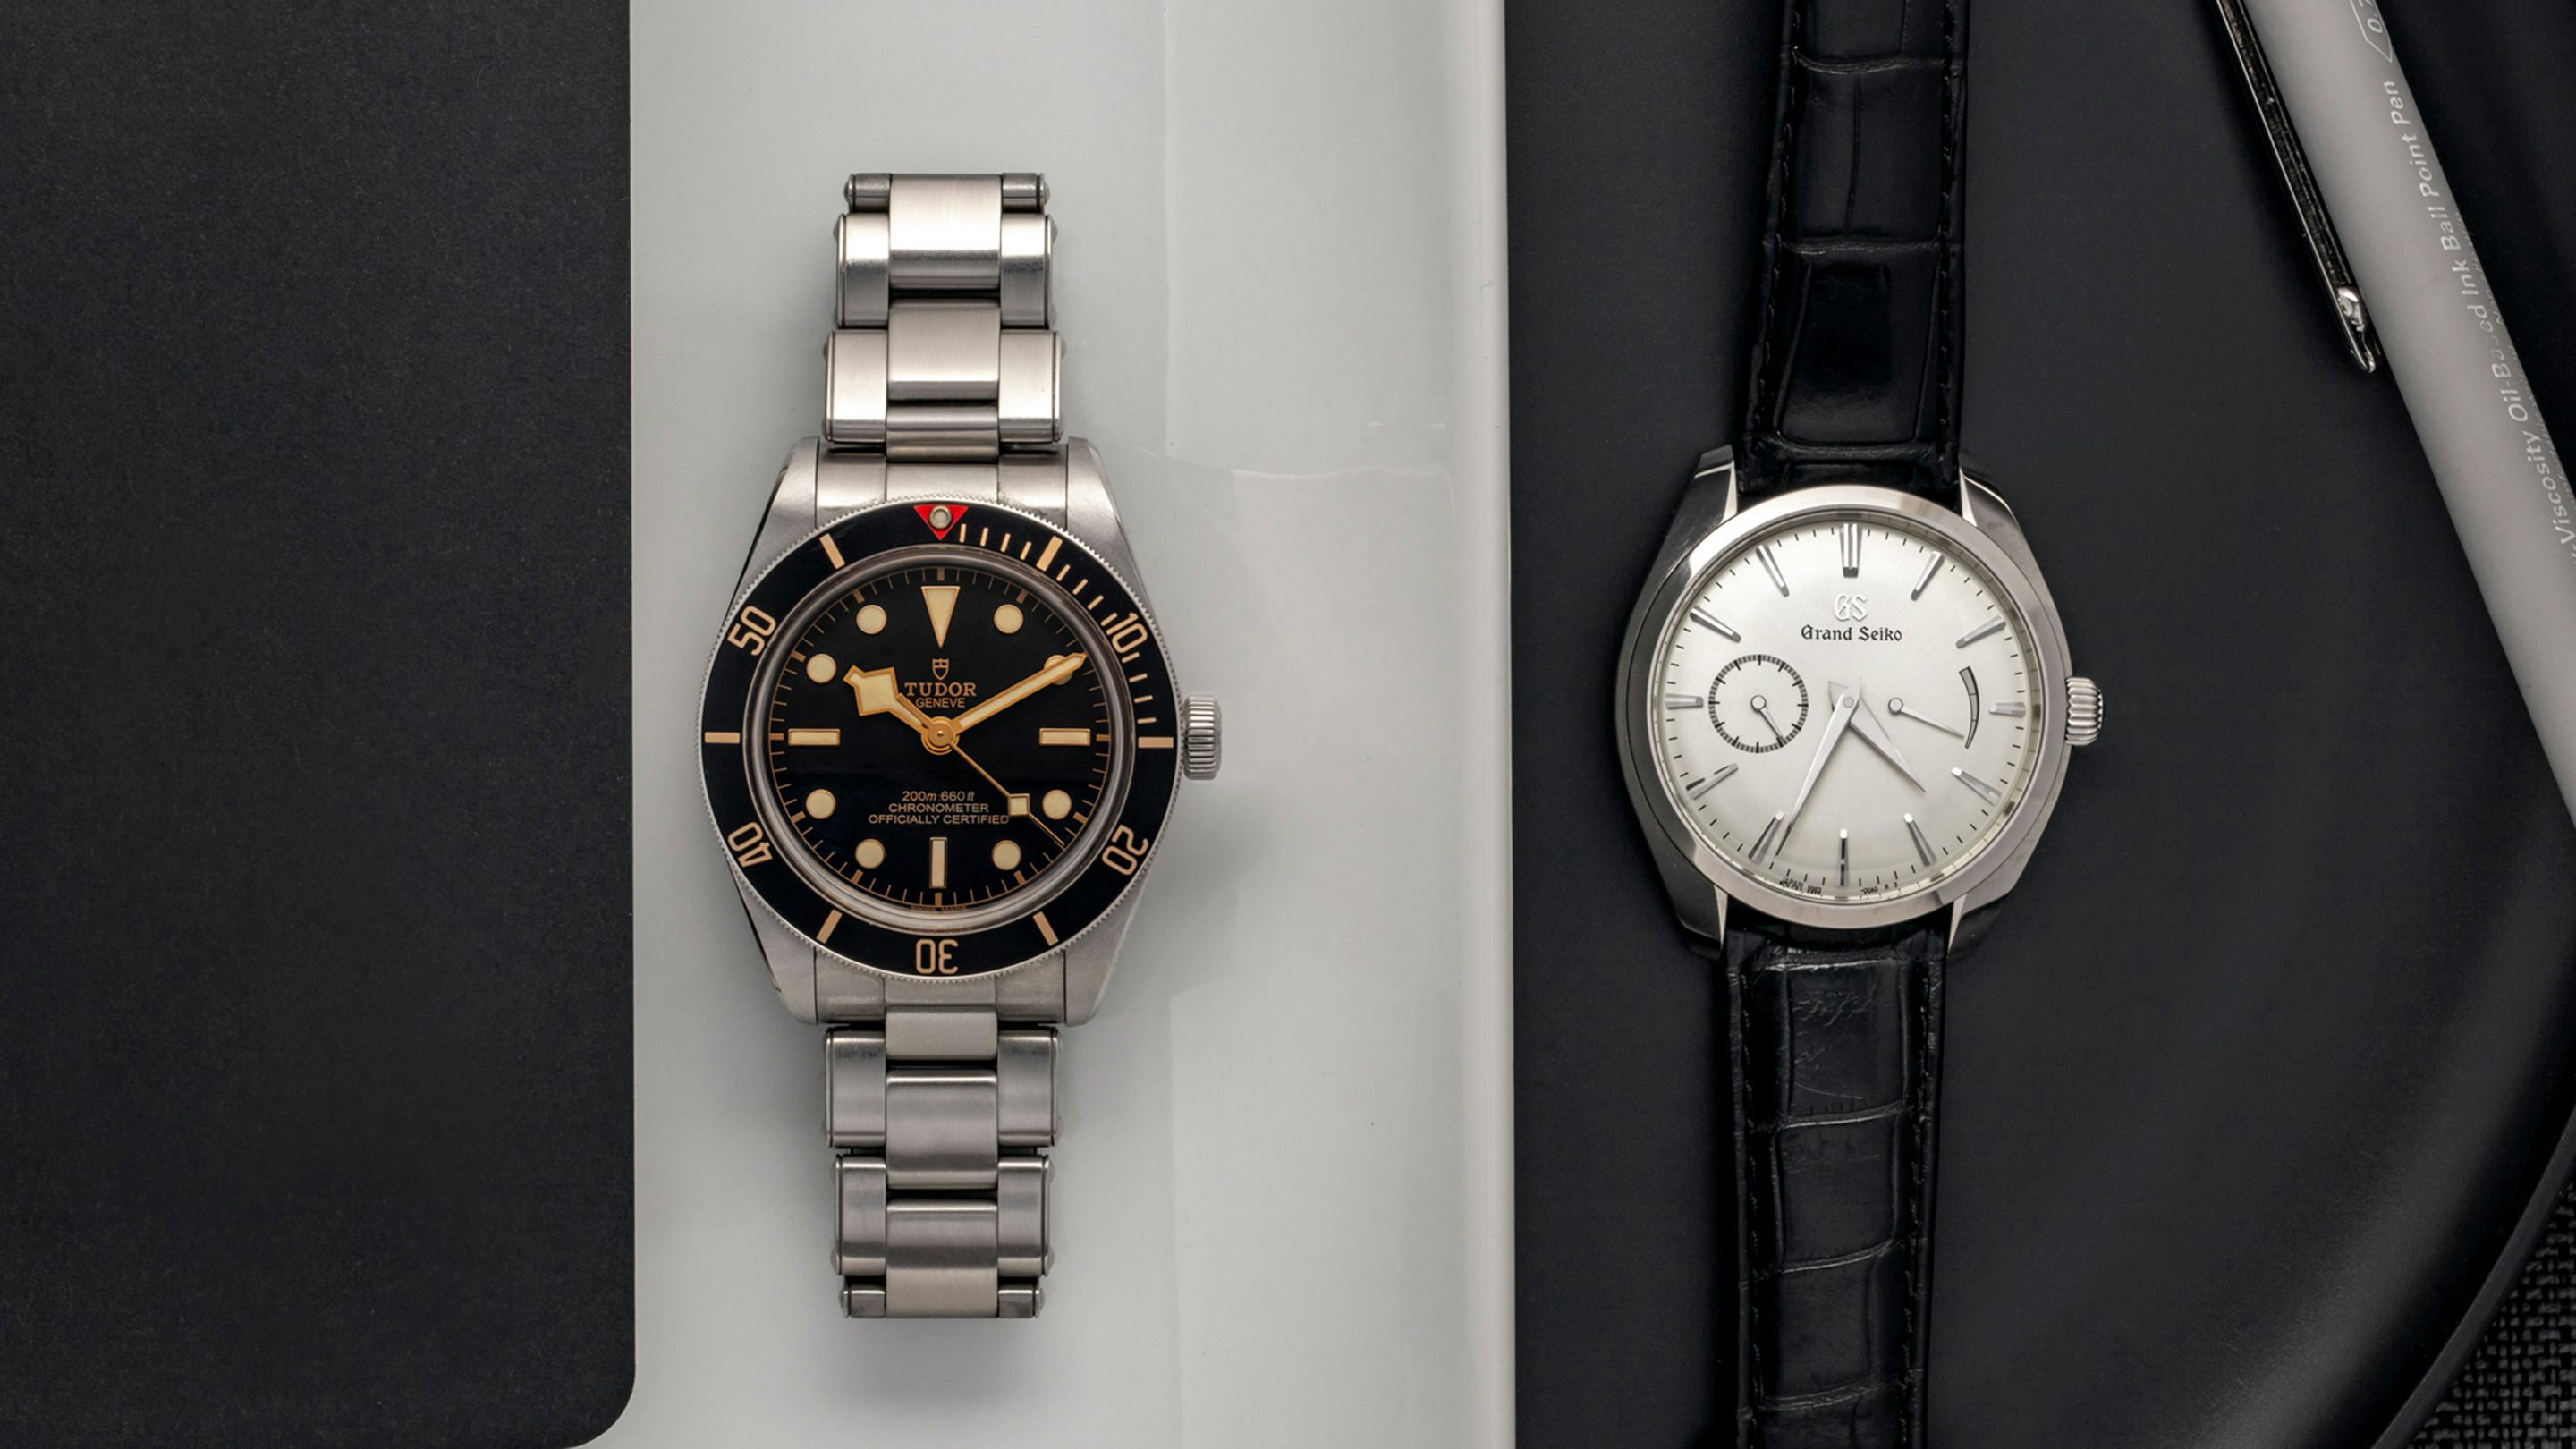 The Two Watch Collection: The Tudor Black Bay 58 And The Grand Seiko  SBGK007 - Hodinkee